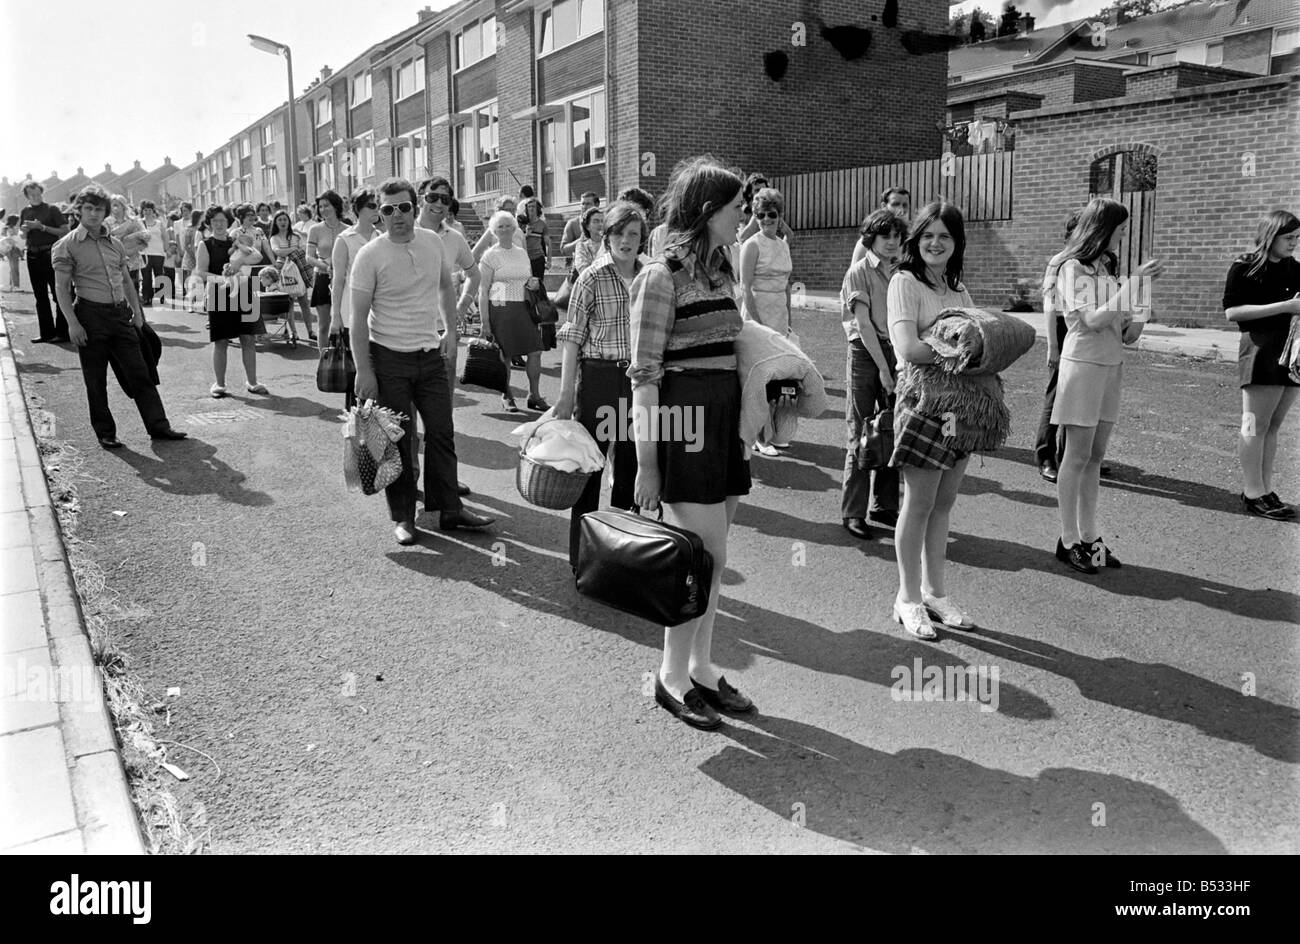 Northern Ireand July 1972. People of the Lenadoon estate evacuate their homes in protest over the heavy army occupation in the area. July 1972 72-7405-004 Stock Photo